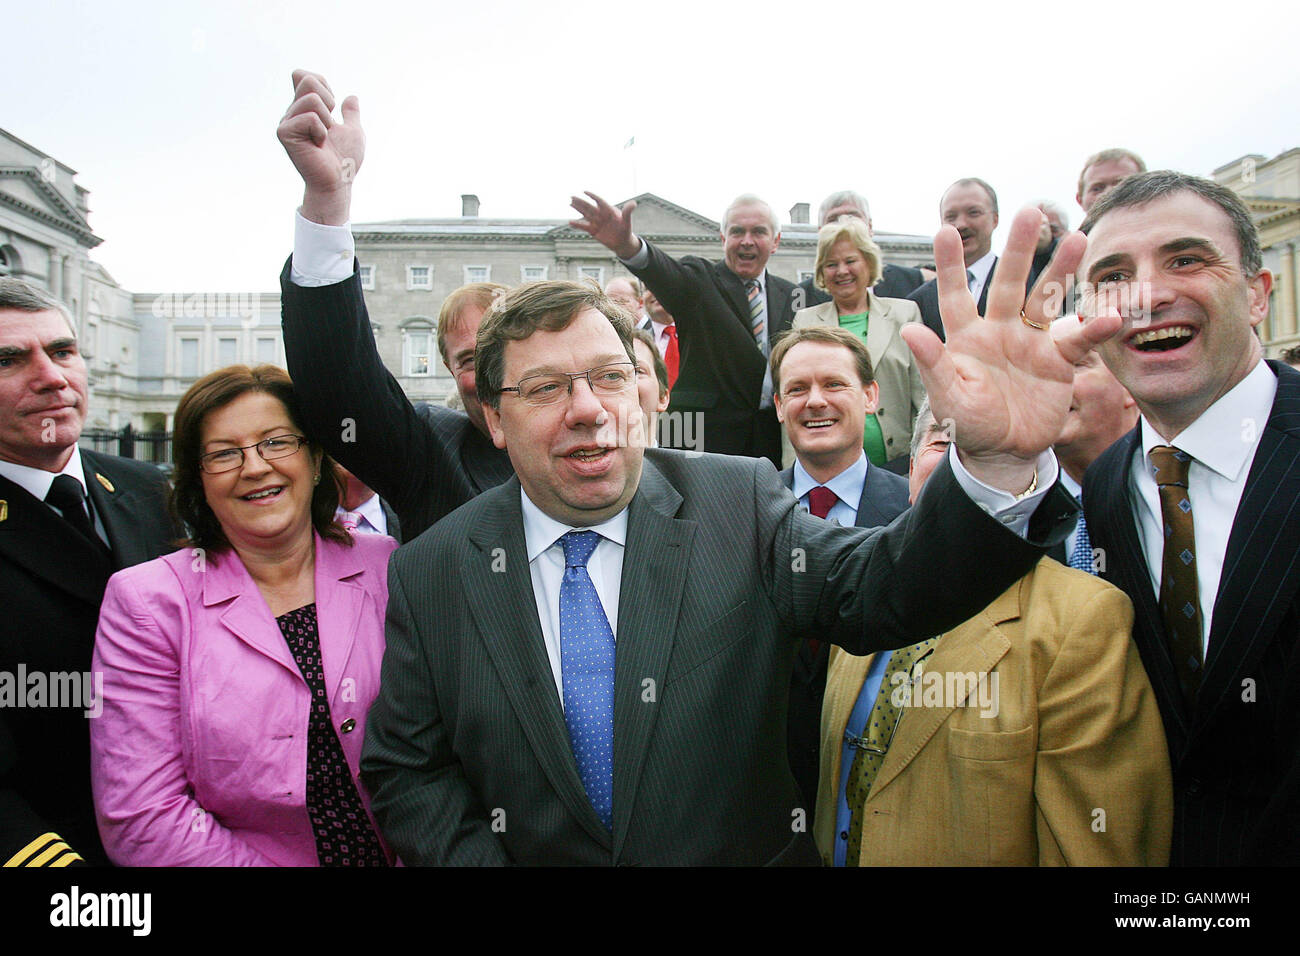 Irish Taoiseach-in-waiting Brian Cowen waves after he was publicly unveiled as Fianna Fail party leader-designate today outside the Dail parliament in Dublin. Stock Photo